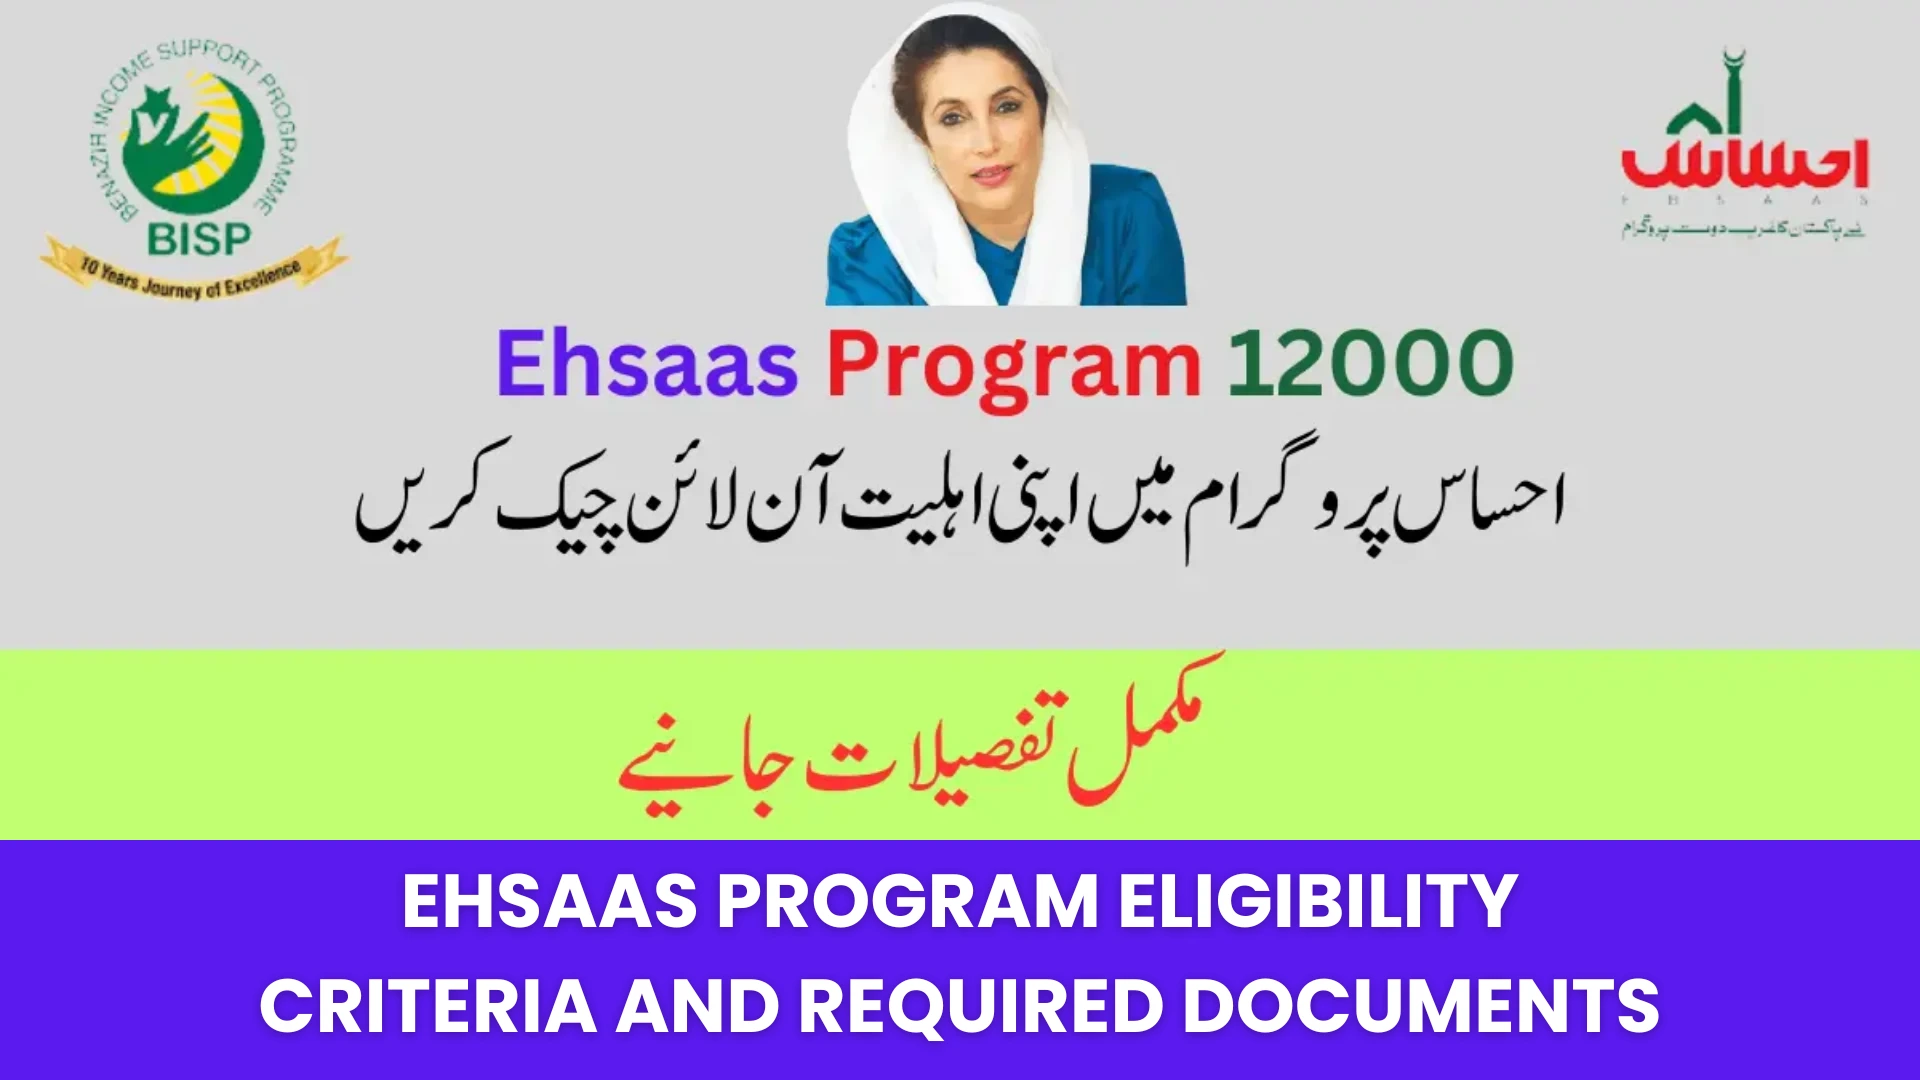 Ehsaas Program Eligibility Criteria and Required Documents